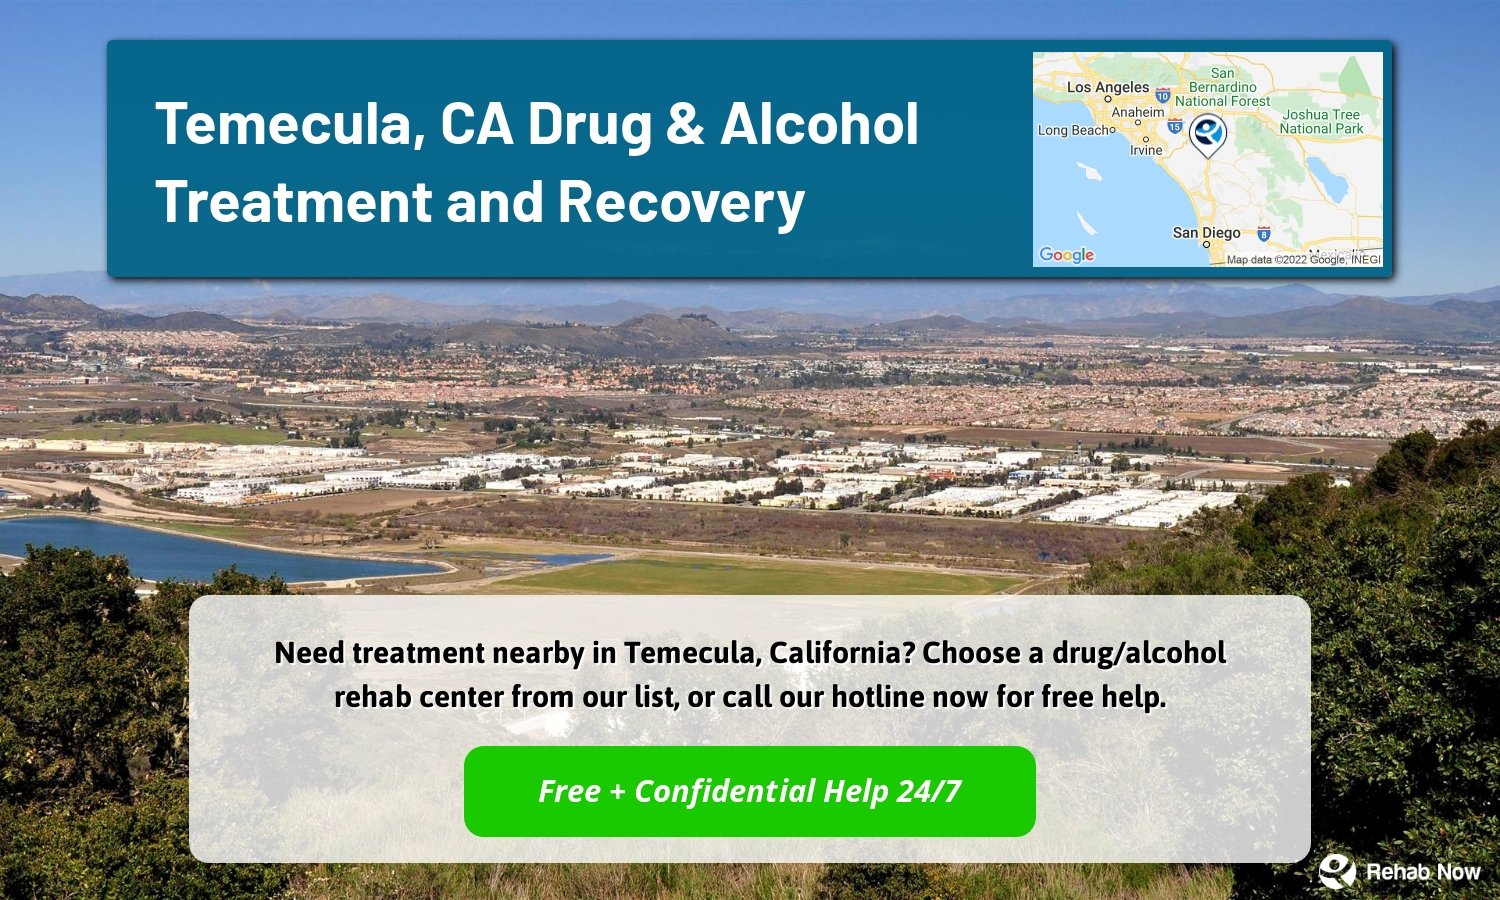 Need treatment nearby in Temecula, California? Choose a drug/alcohol rehab center from our list, or call our hotline now for free help.